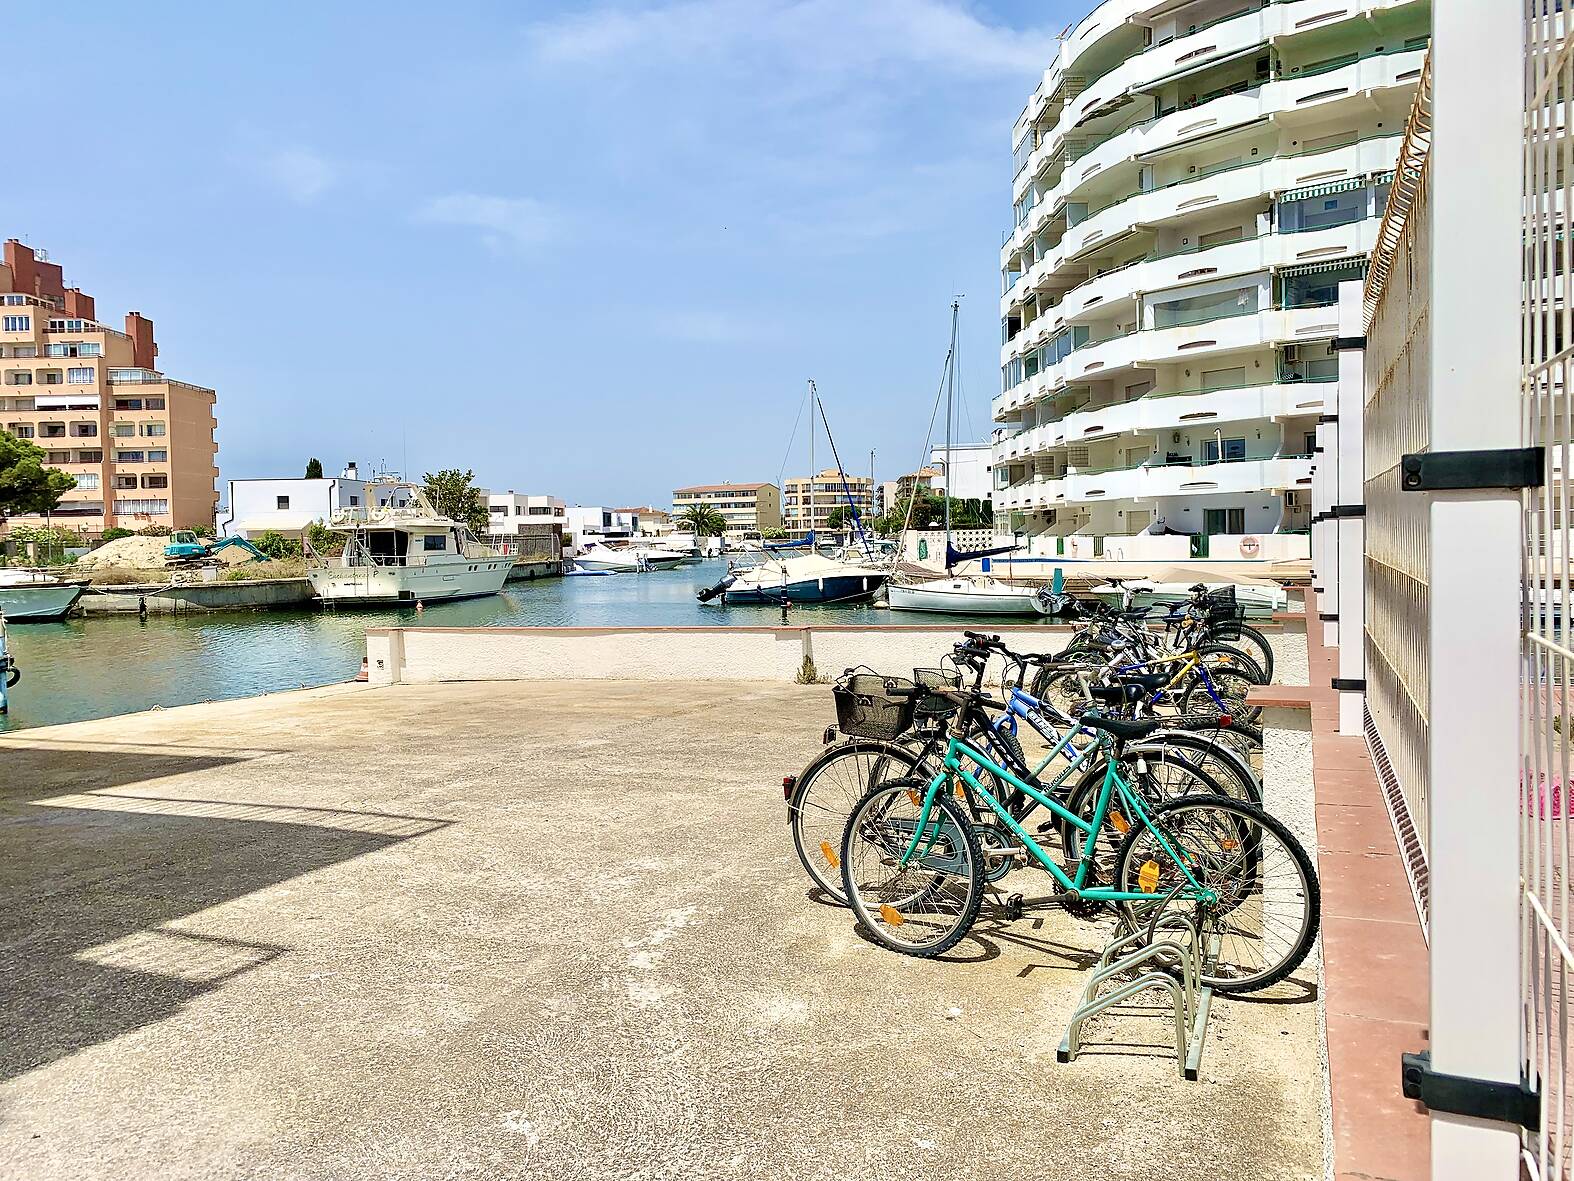 Superb apartment with view of the canal, close to the beach of Santa Margarita